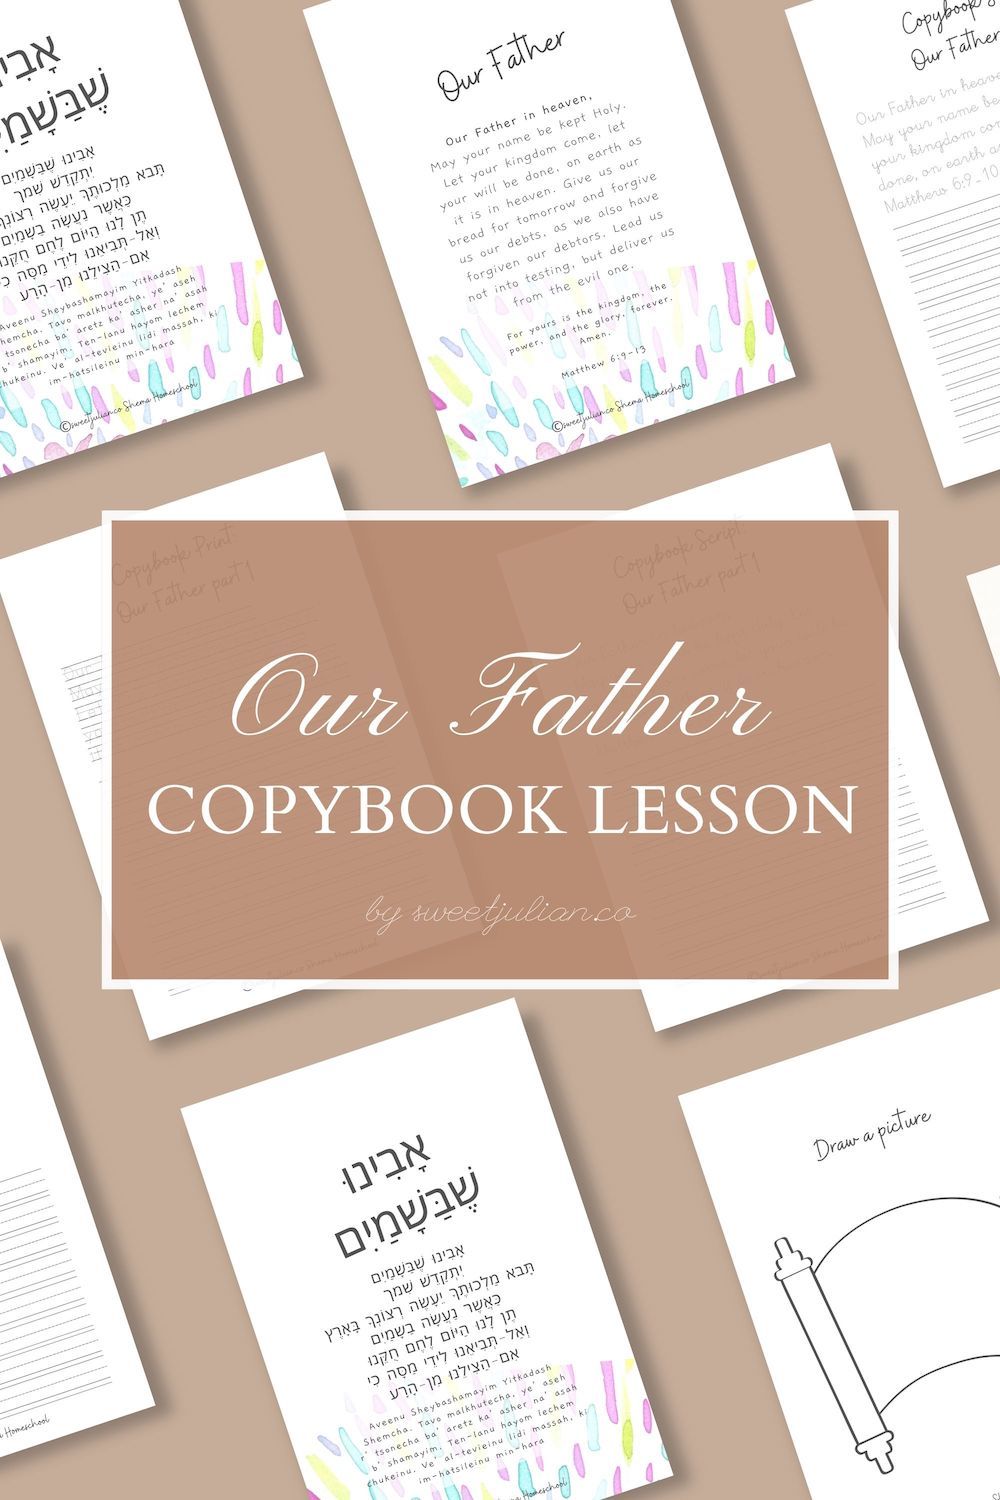 Our Father Copybook Lesson